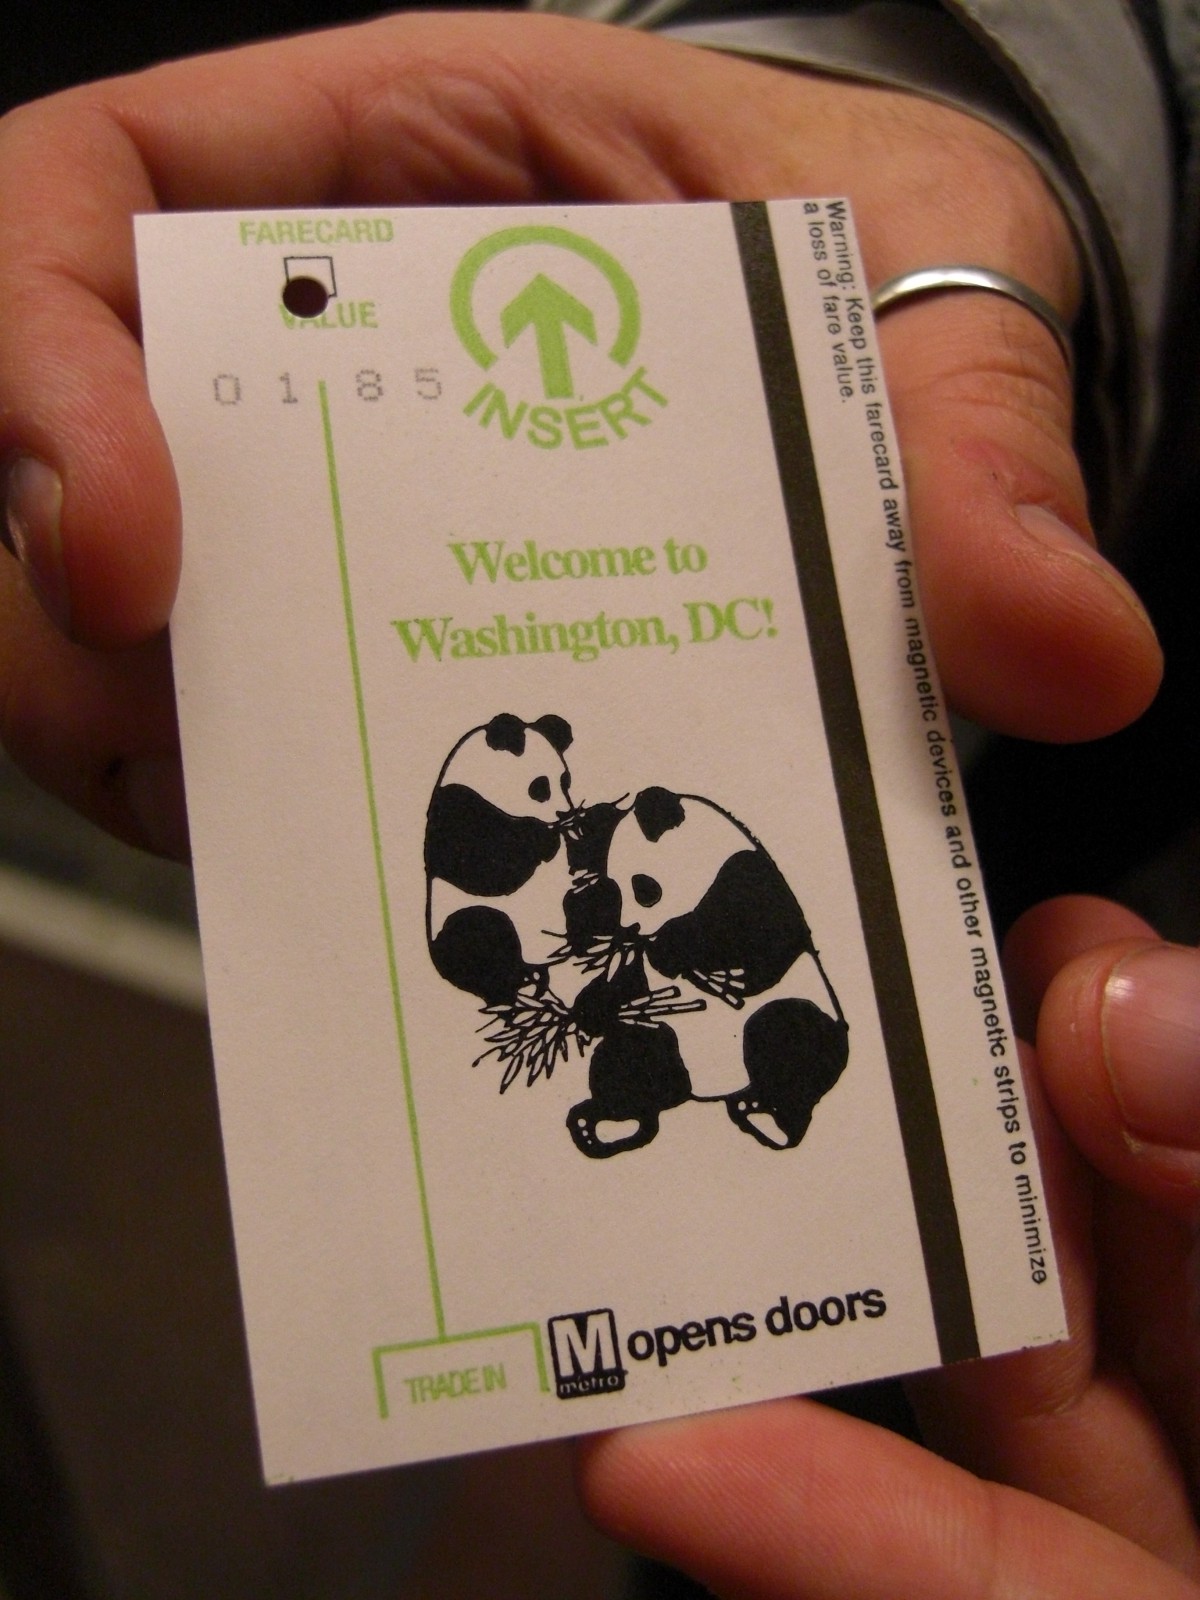 metro-will-eliminate-paper-farecards-in-2015-greater-greater-washington